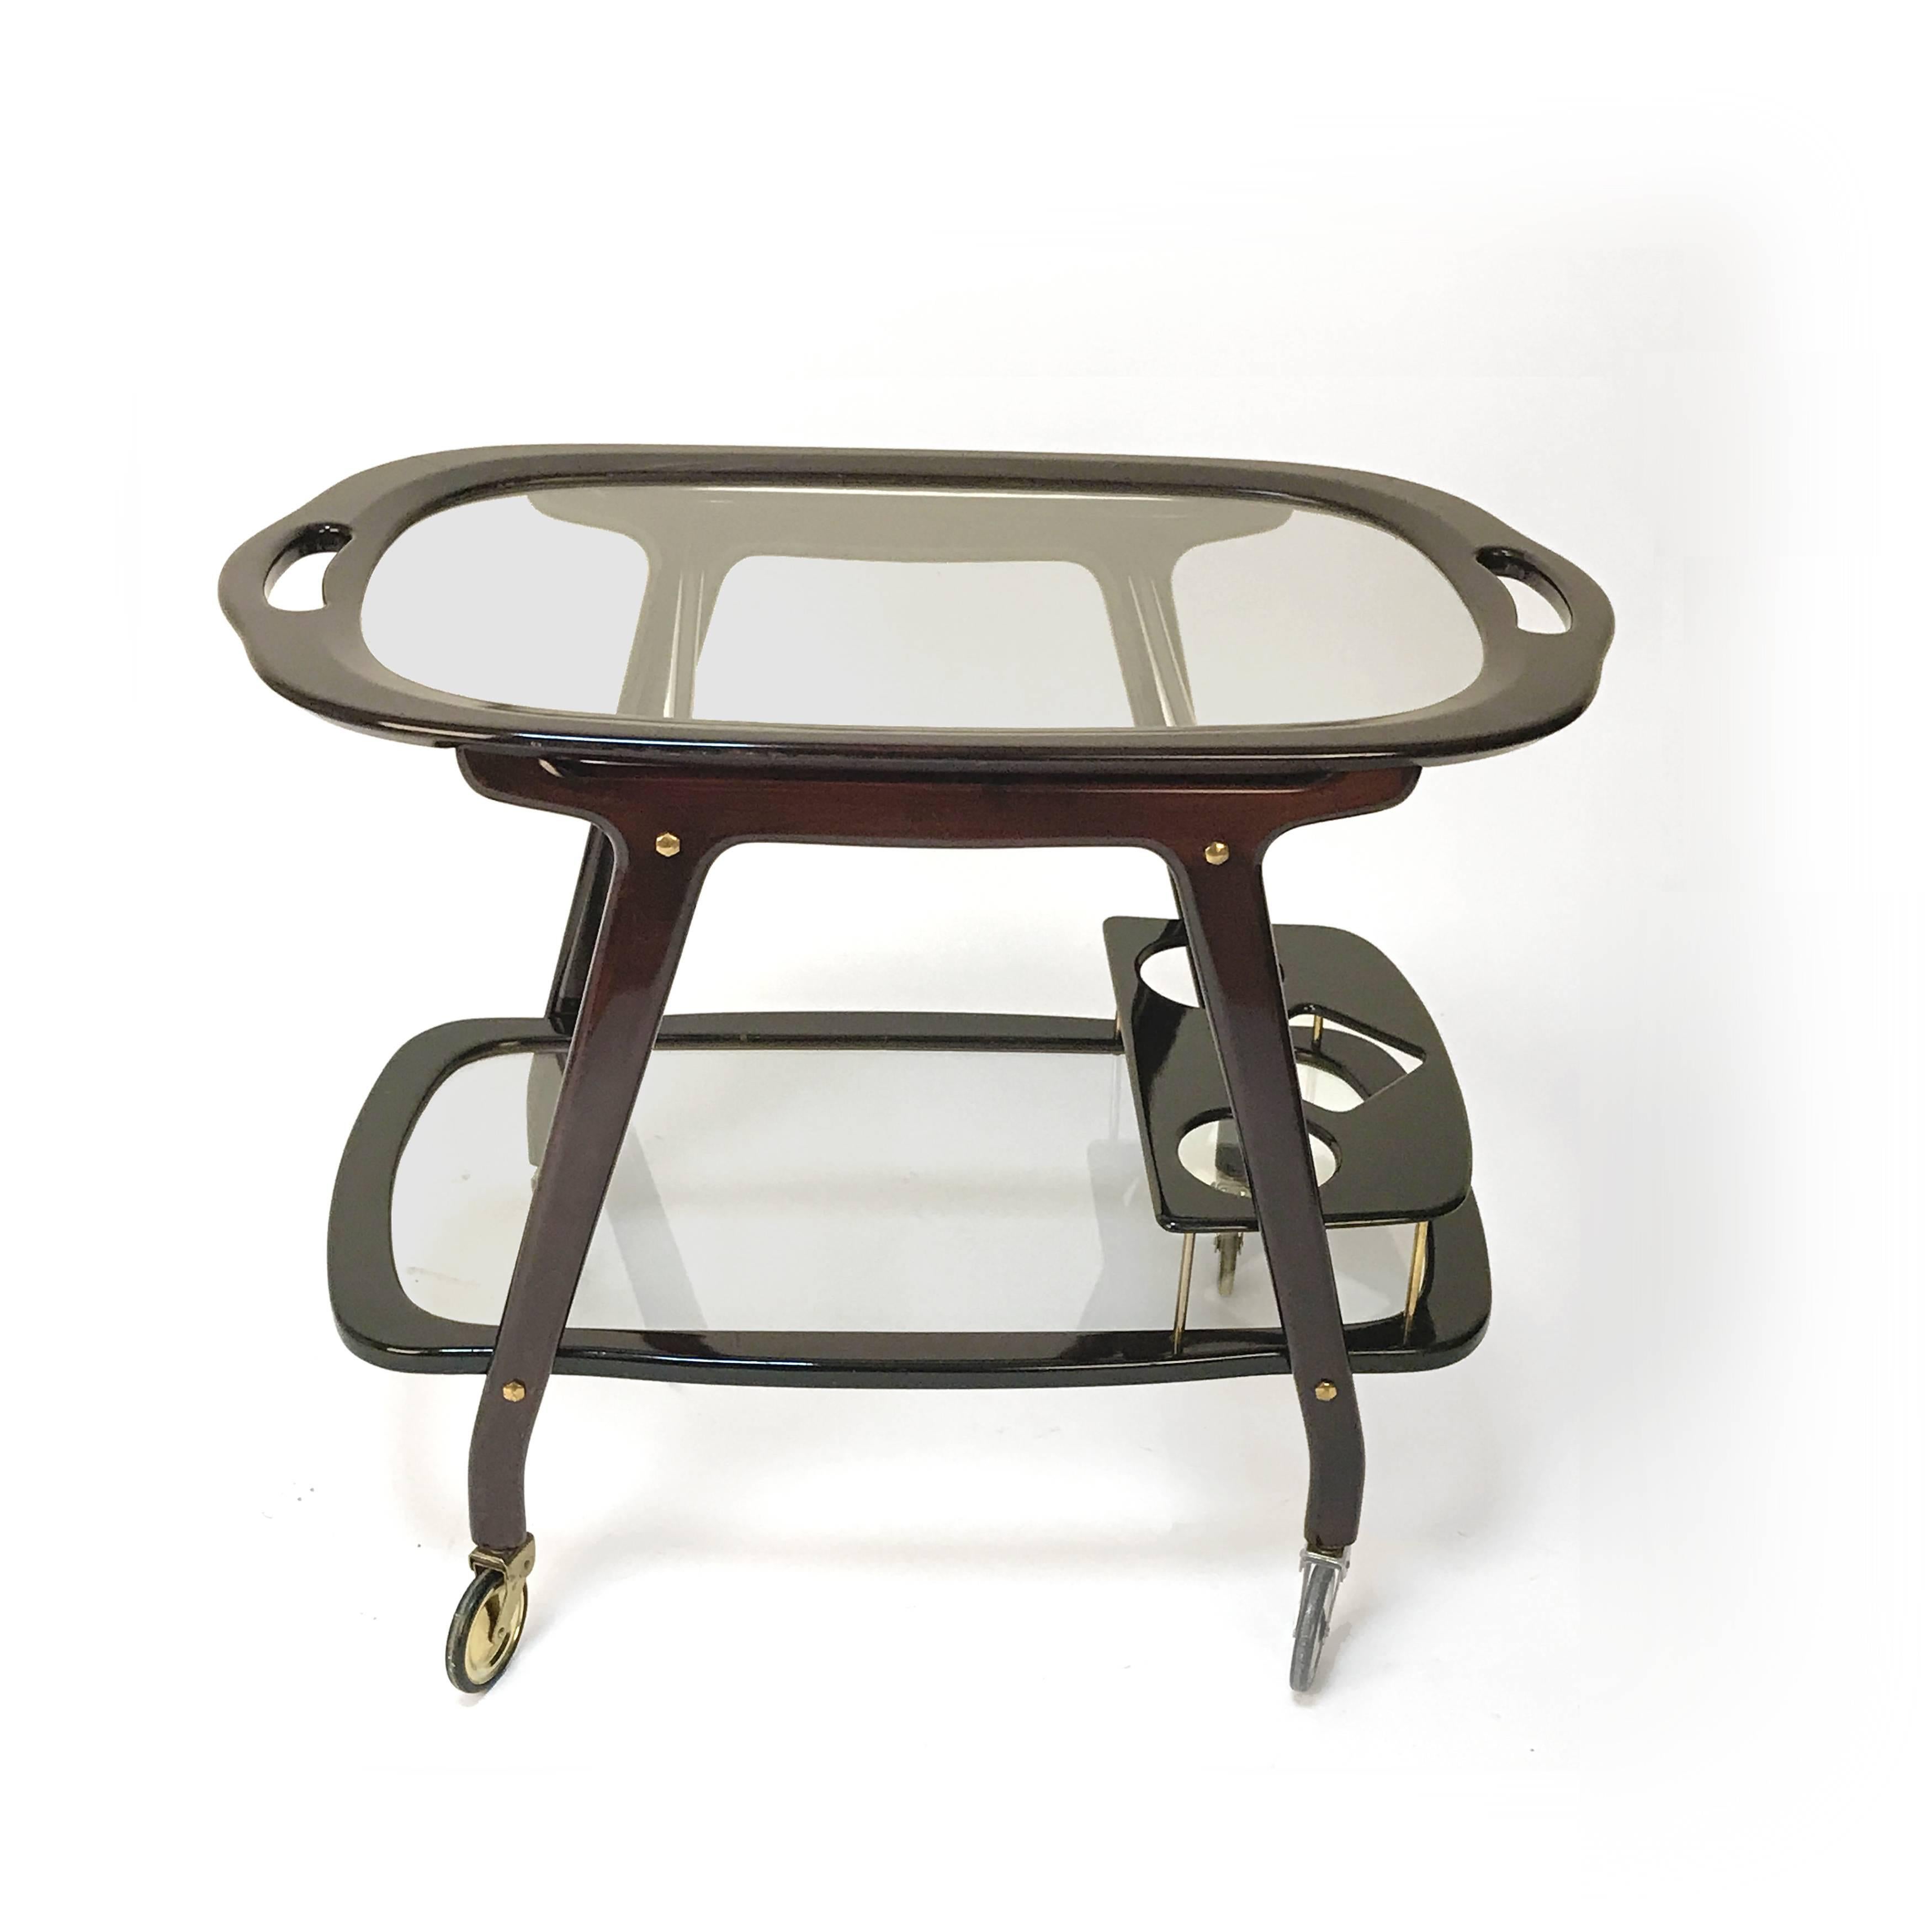 Italian trolley designed by Cesare Lacca during the 1950s in wood.
The lower shelf is equipped with a bottle holder, the upper shelf can be removed as a tray. Professionally restored.